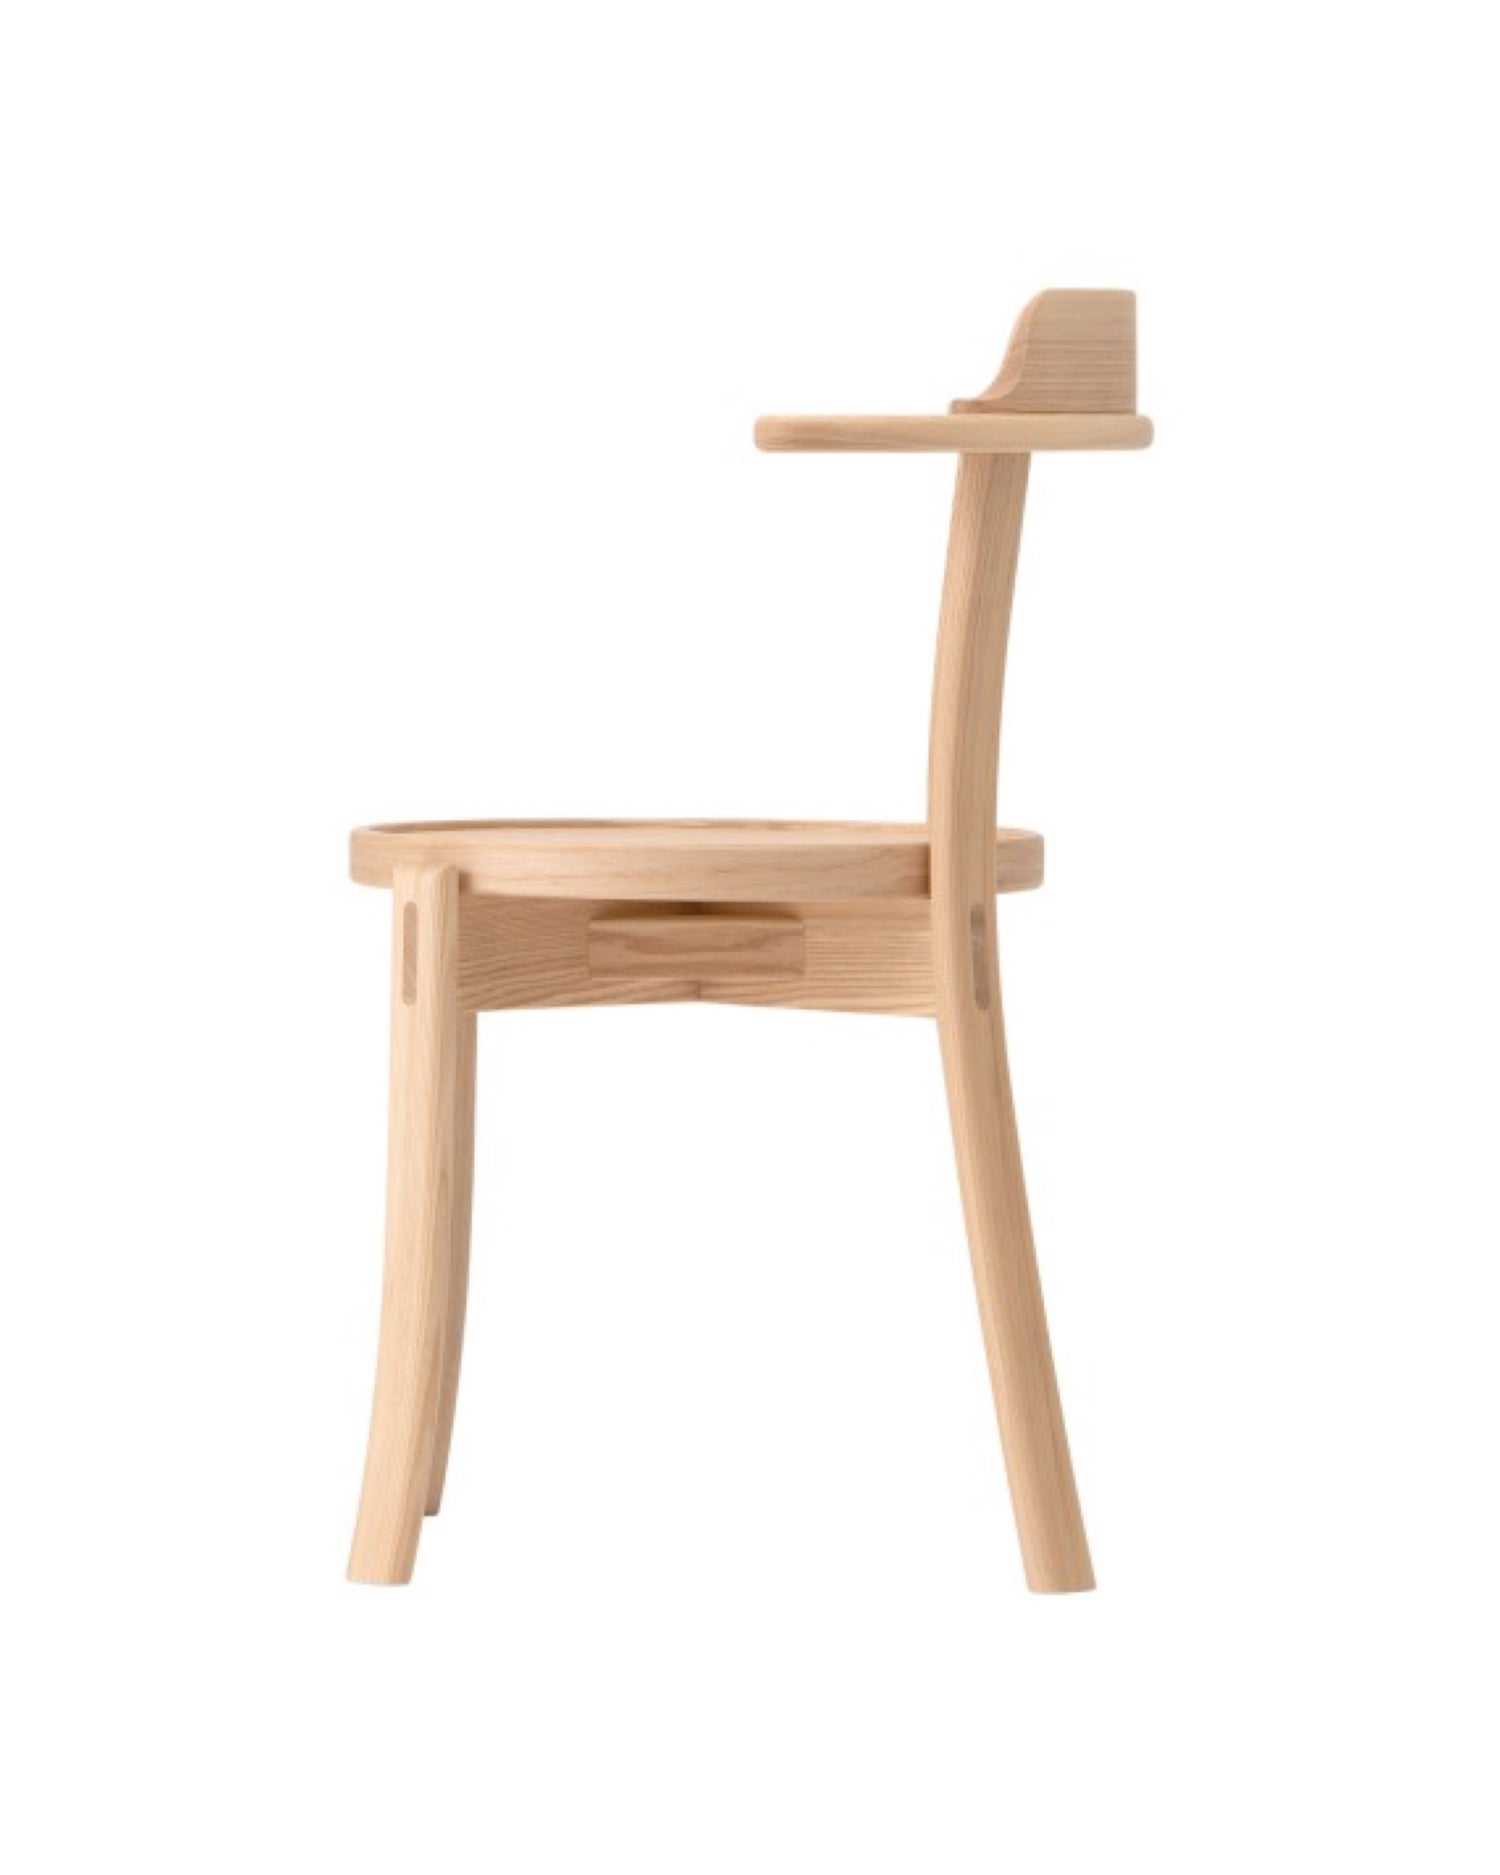 Darby Chair, profile view, CondeHouse